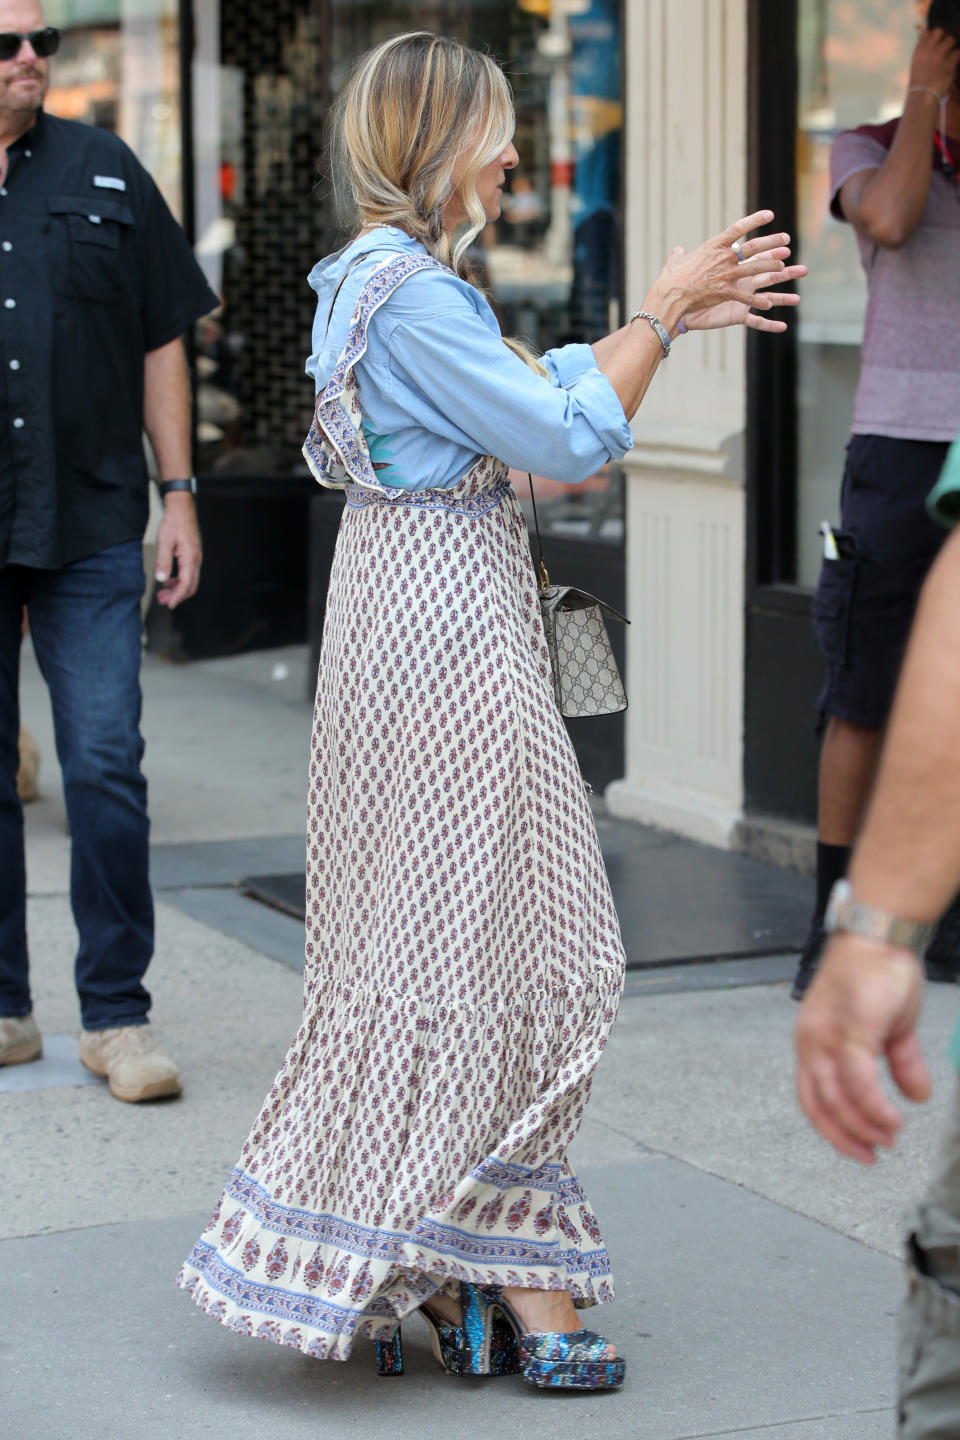 Sarah Jessica Parker films “And Just Like That” on the Upper West Side in New York City. - Credit: Christopher Peterson / SplashNews.com